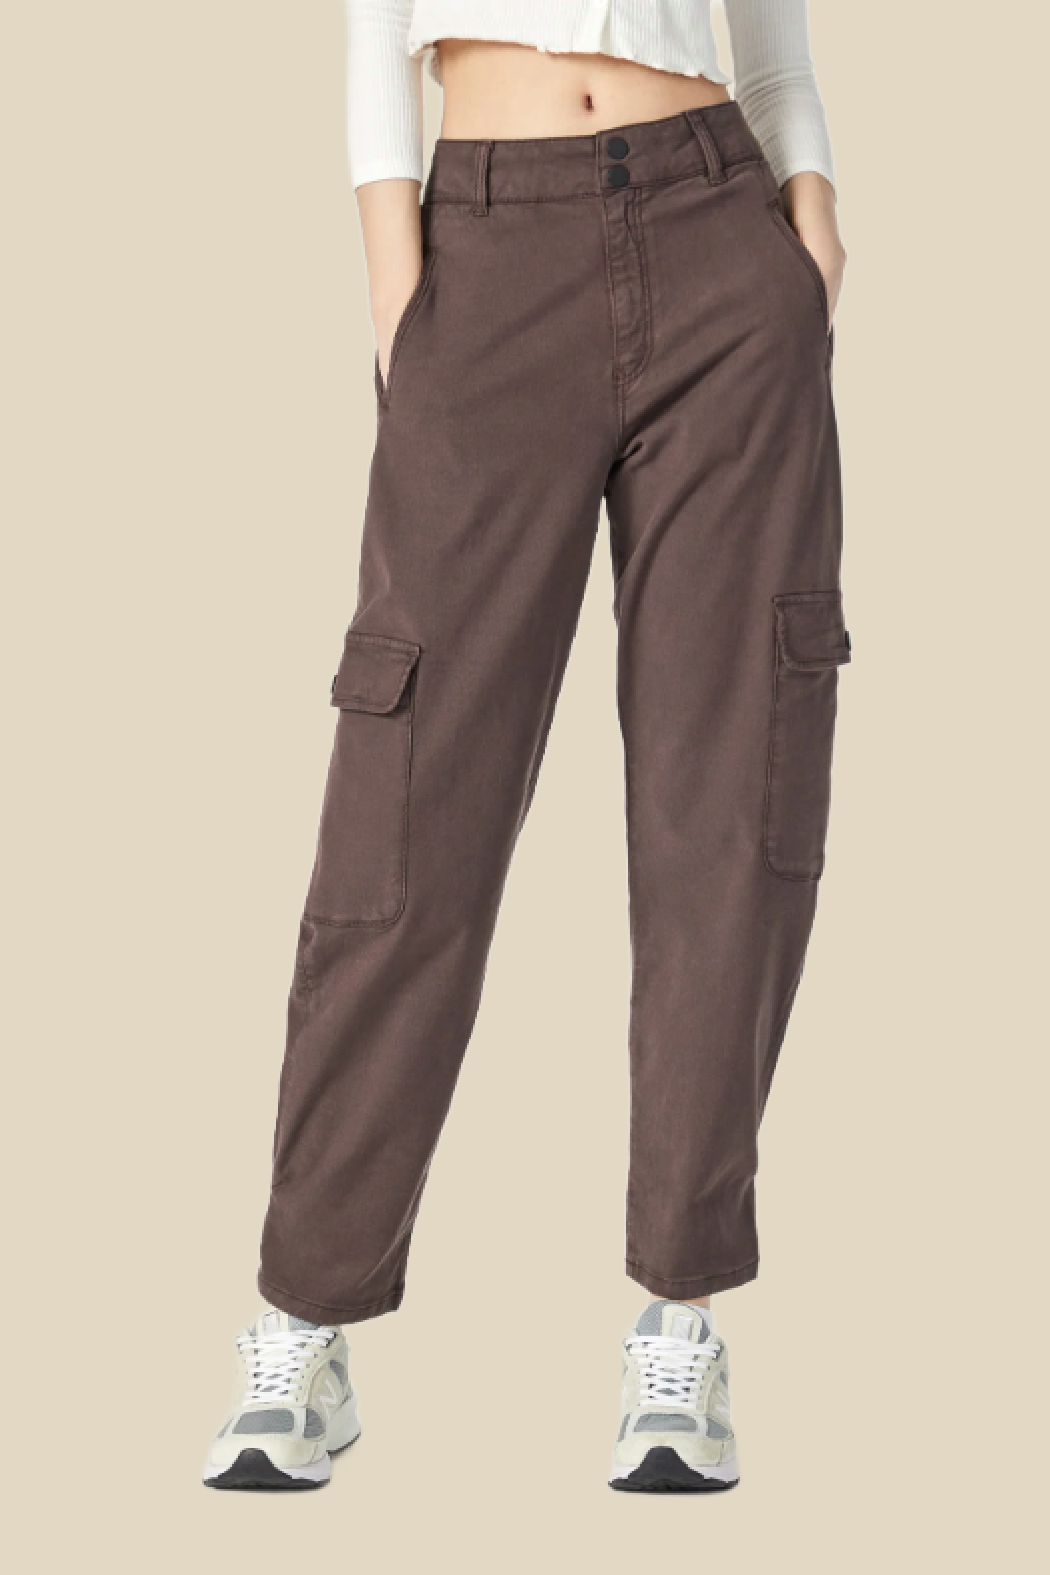 Elsie Cargo Pants – The Old Mill